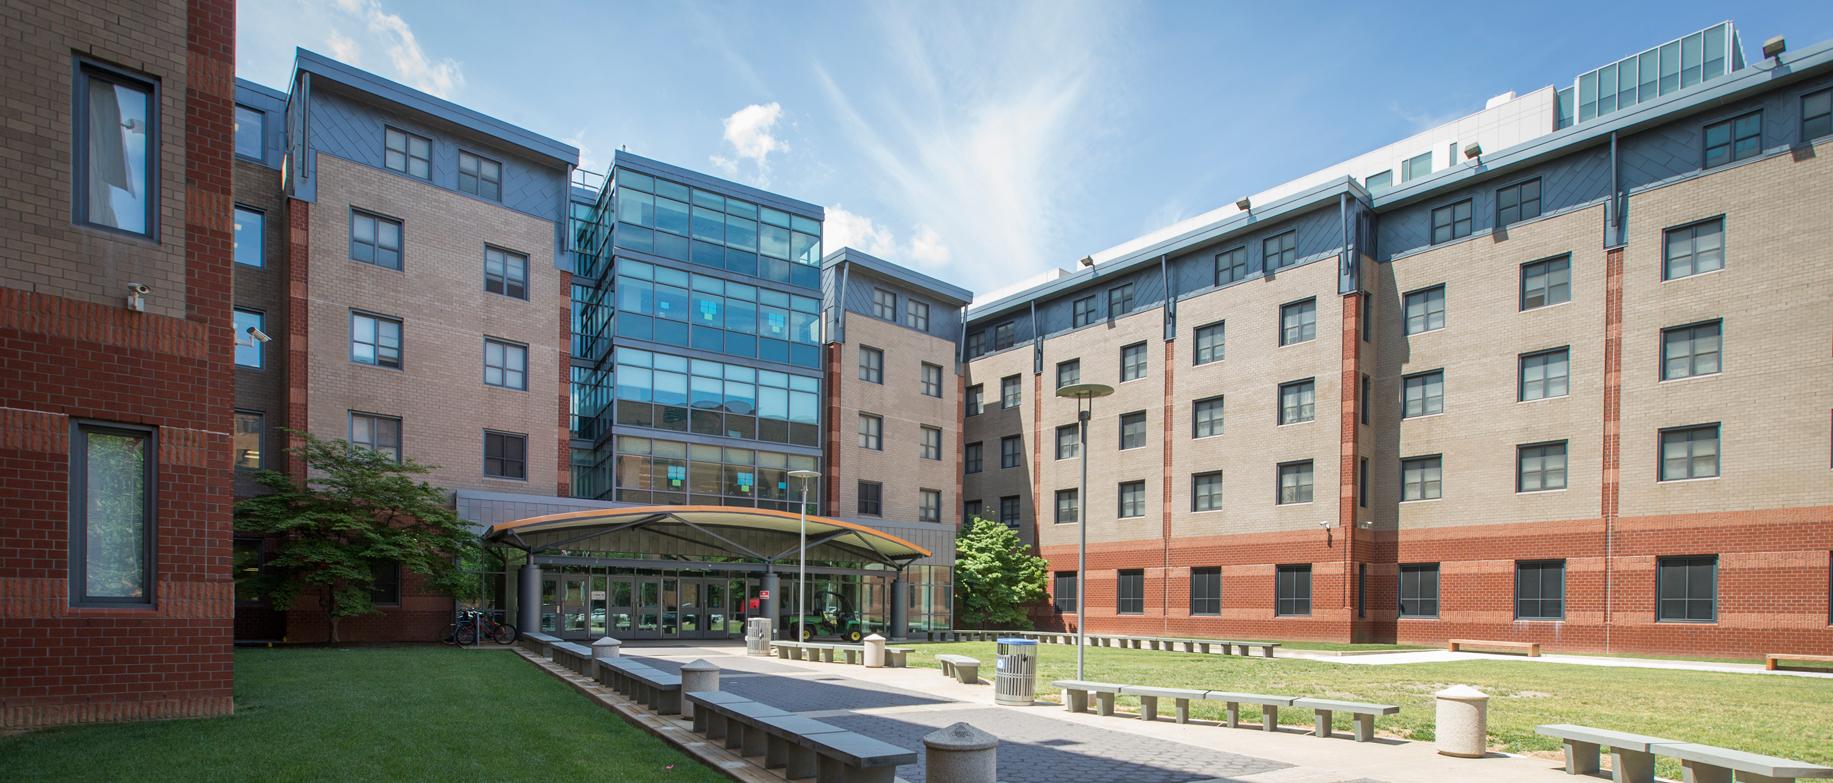 Top 6 Dorms at Temple University